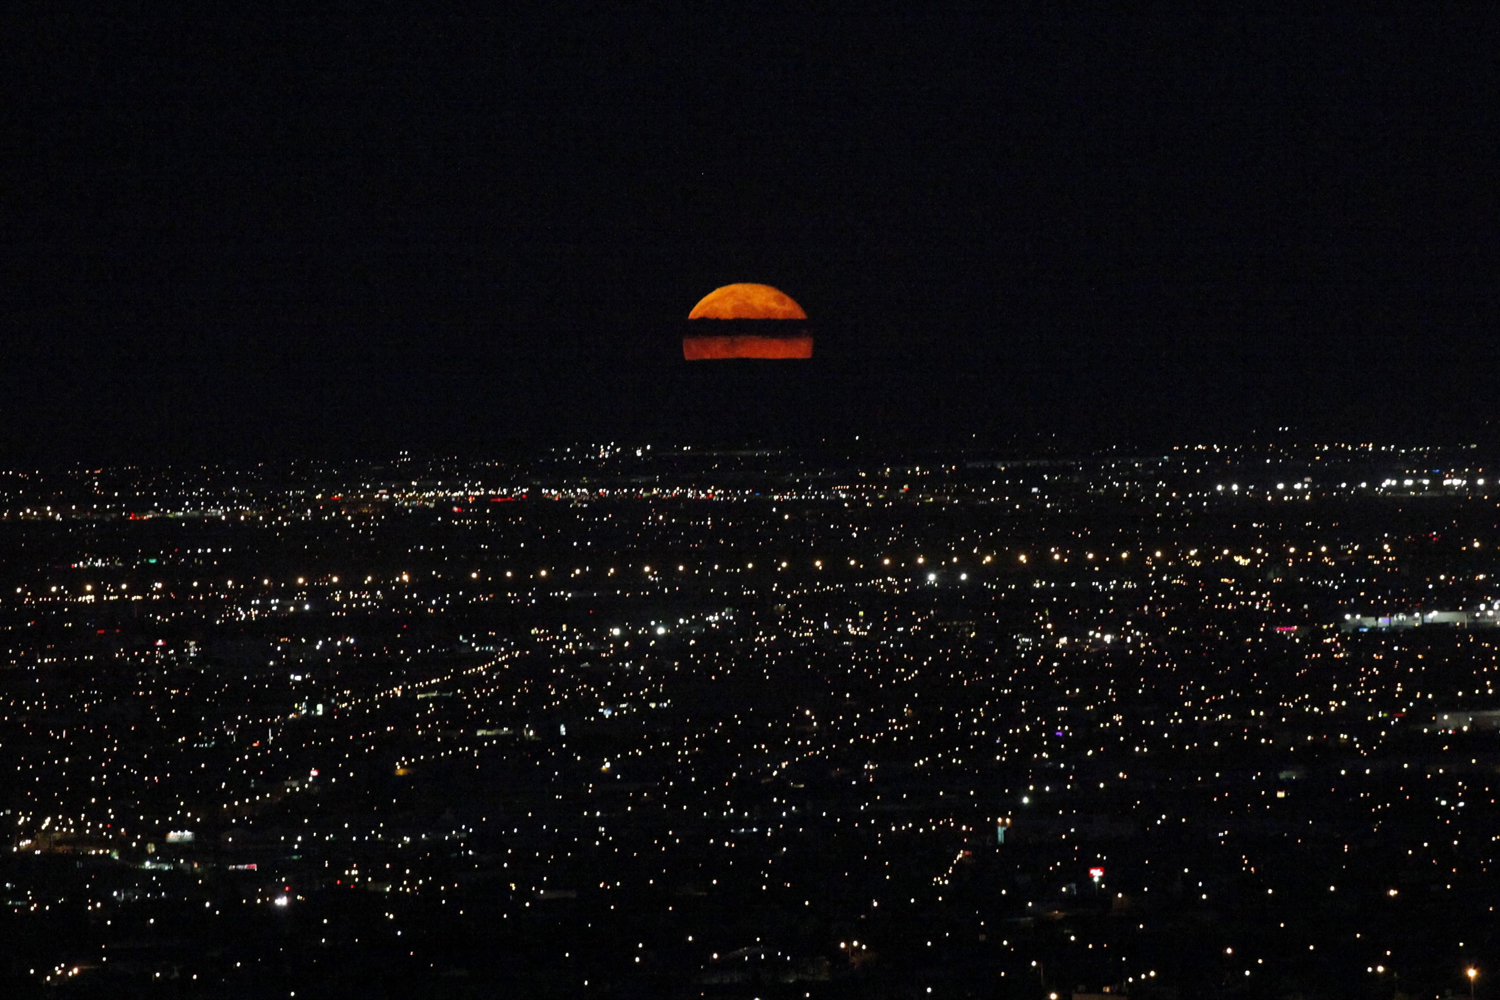 Sept. 9, 2014. A supermoon rises over Ciudad Juarez. The September full moon, also known as the Harvest Moon, is the last of this summer's three supermoons, and the final one of the year.